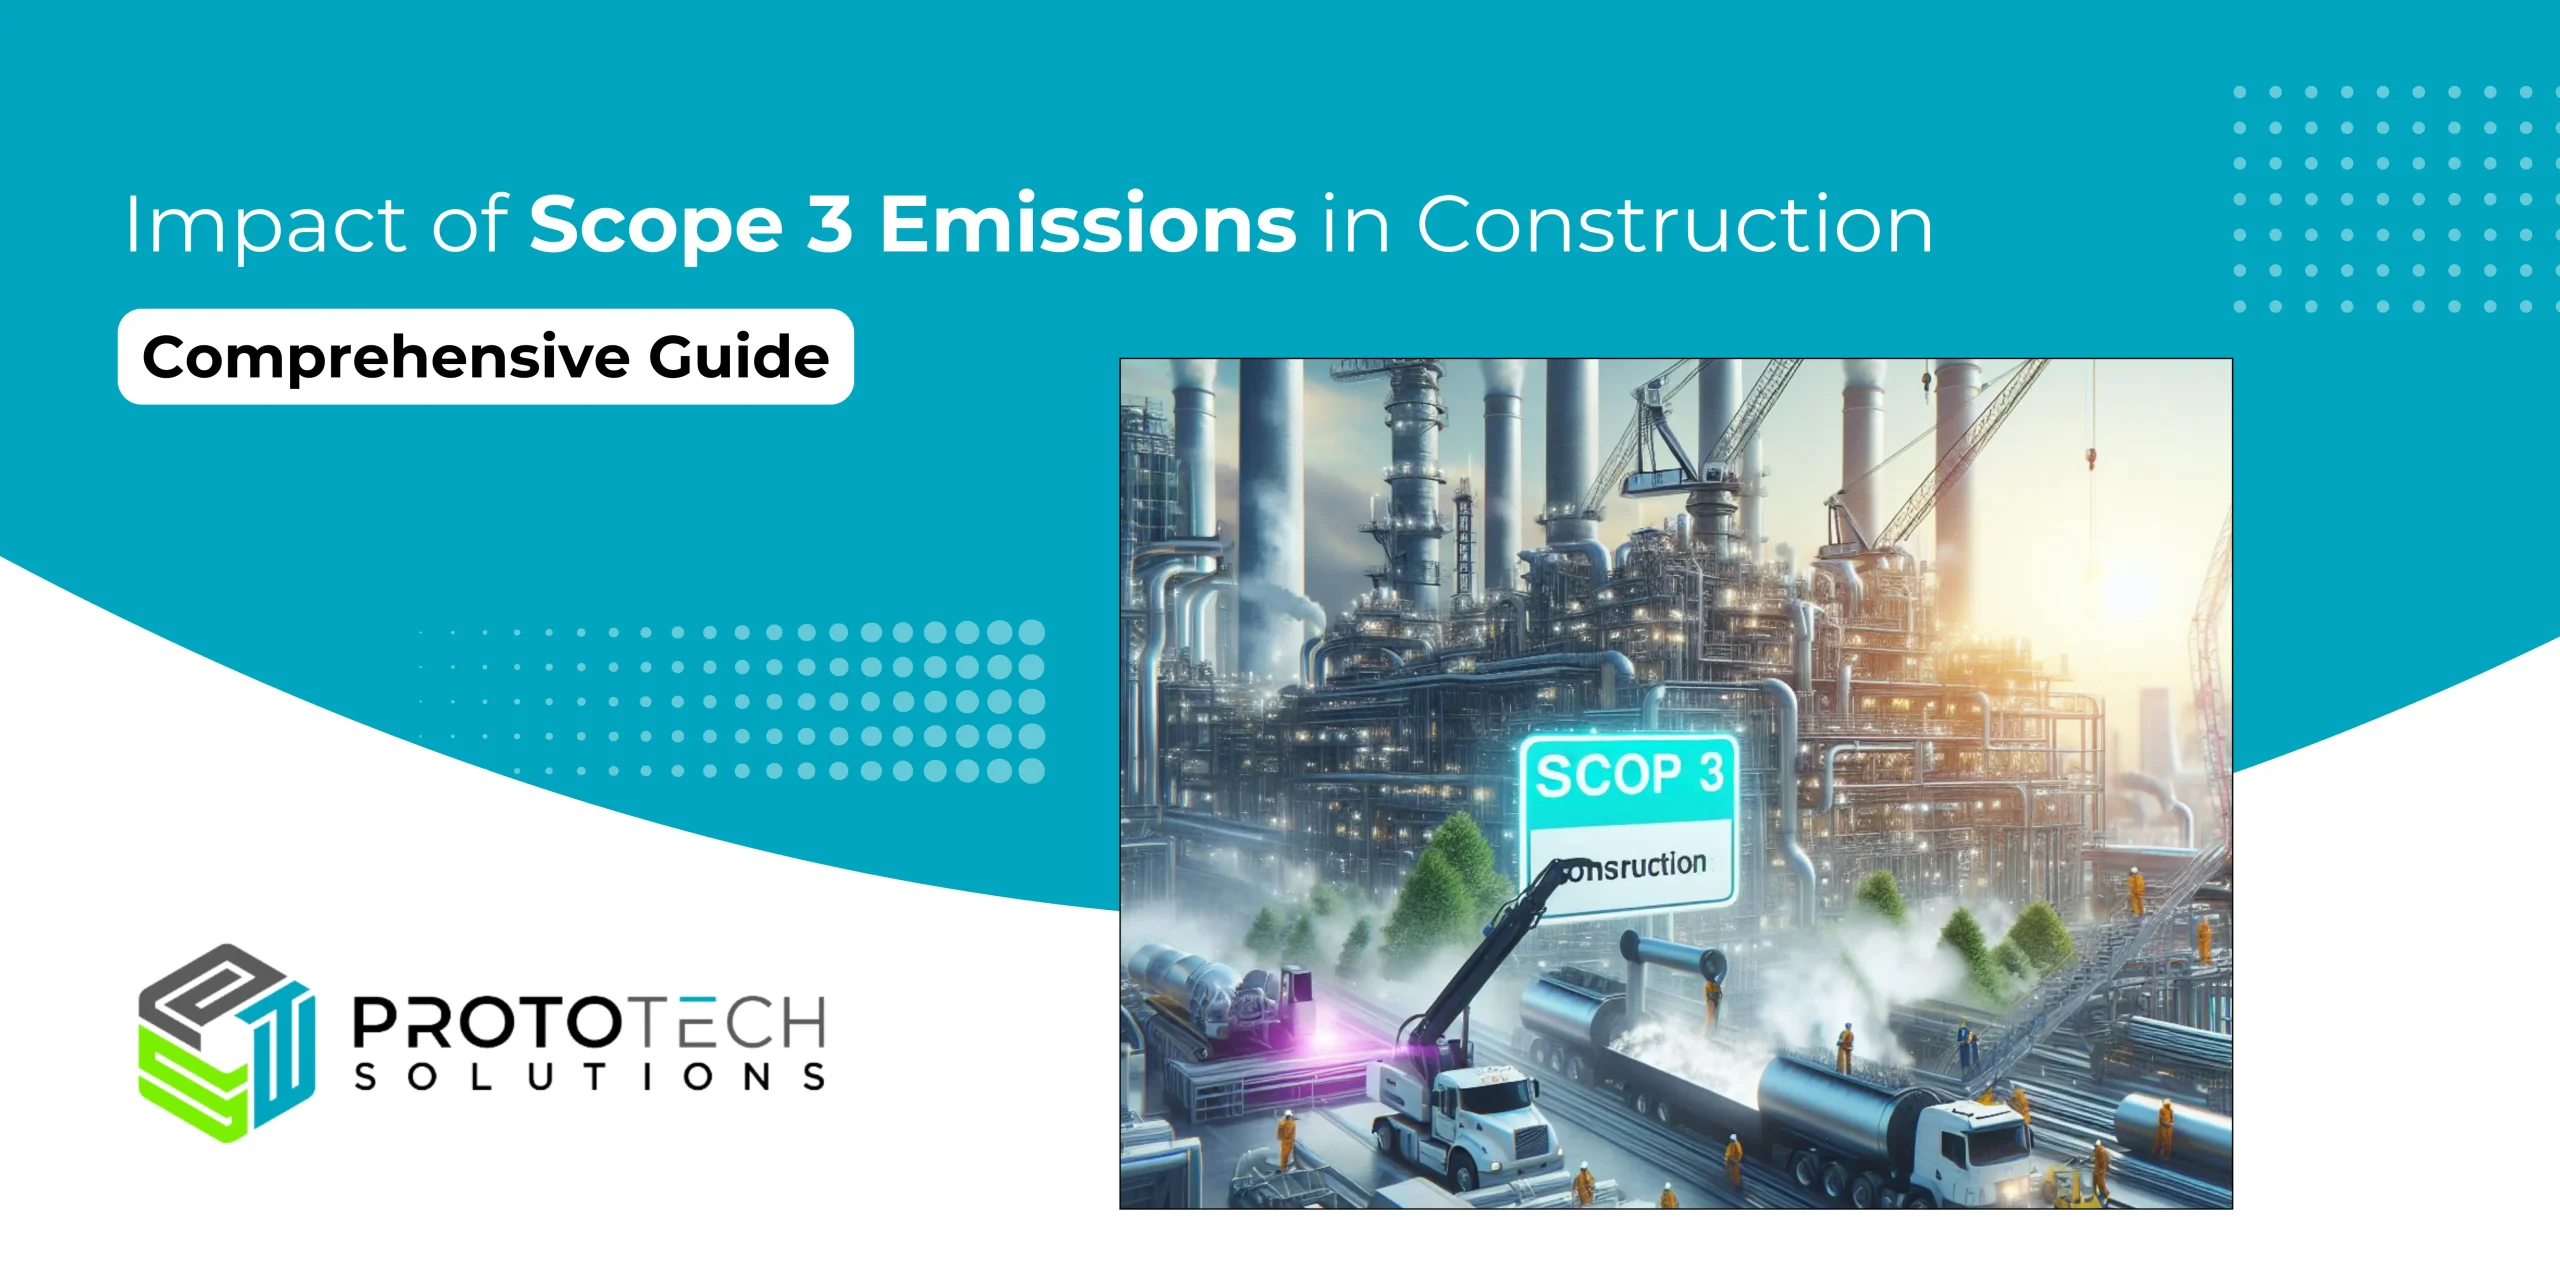 Impact of Scope 3 Emissions in Construction